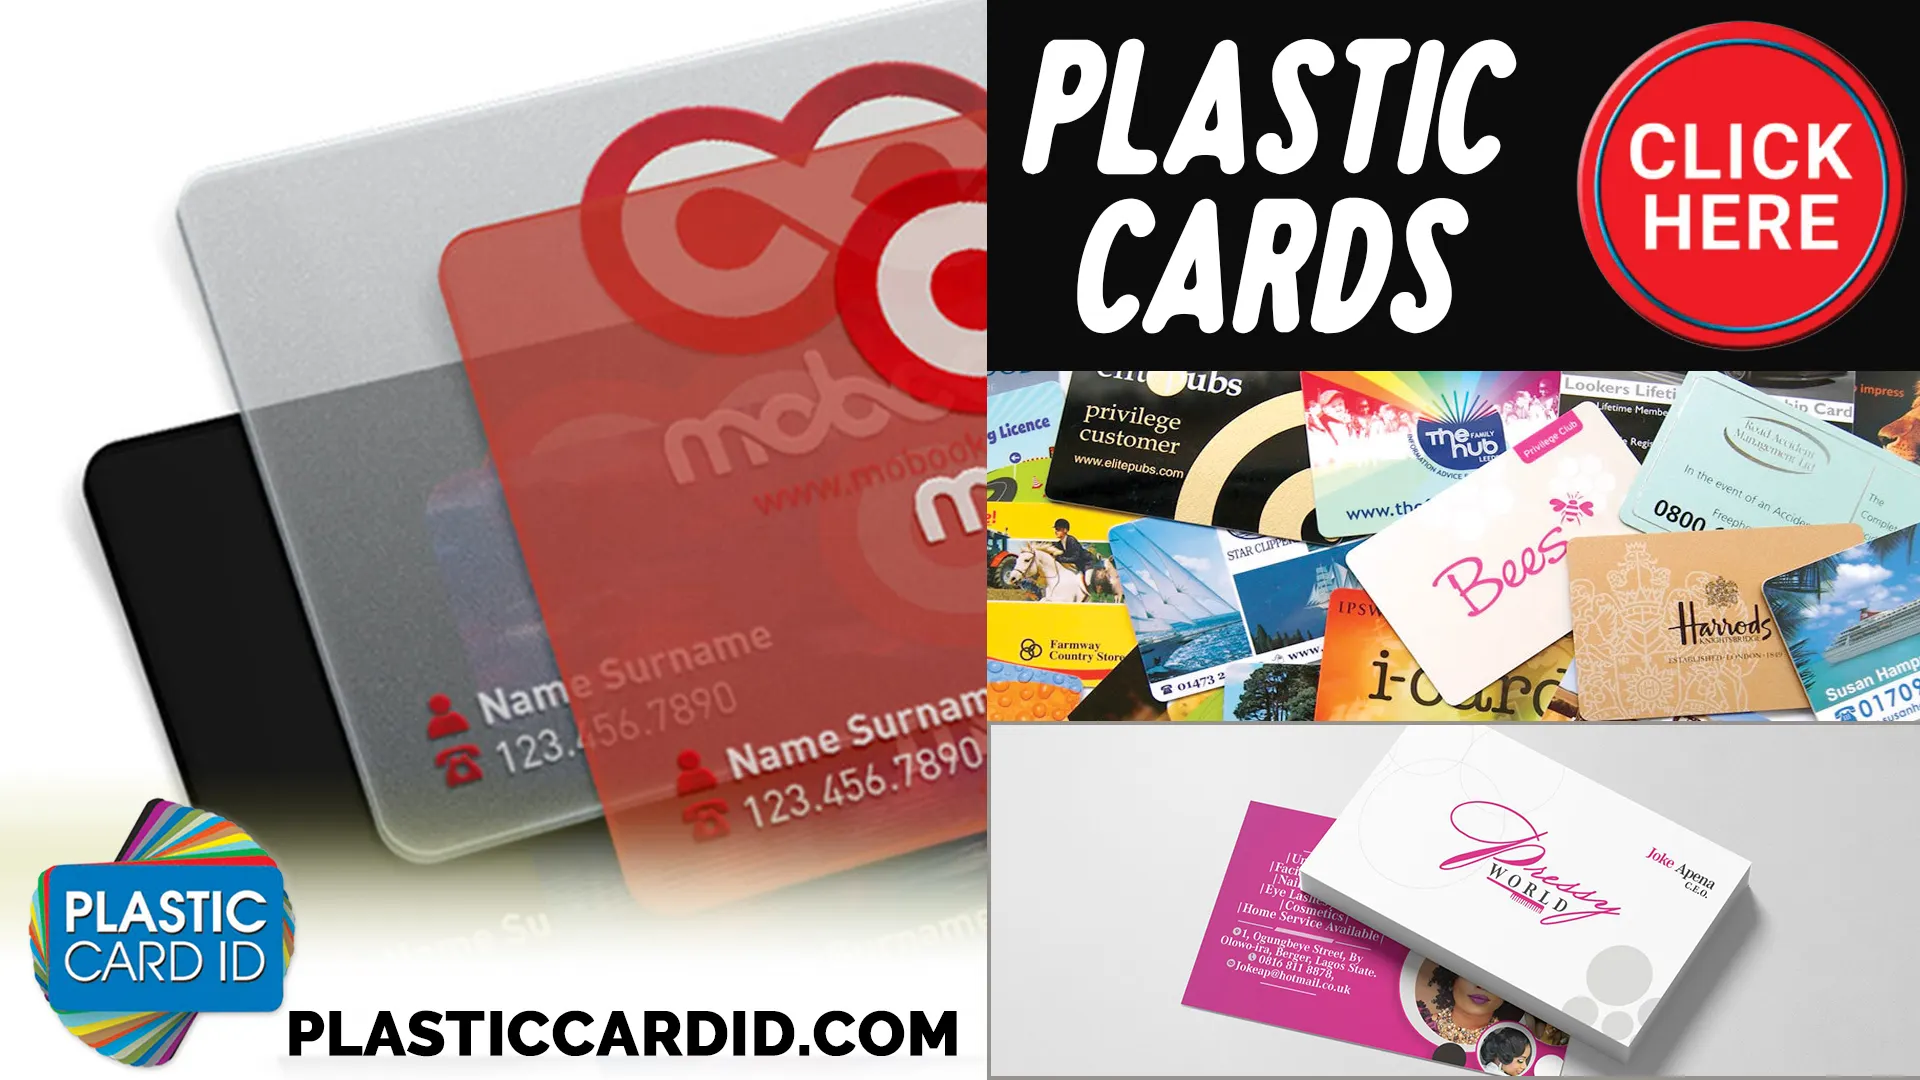 Stand Out with Stunning Metallic Cards